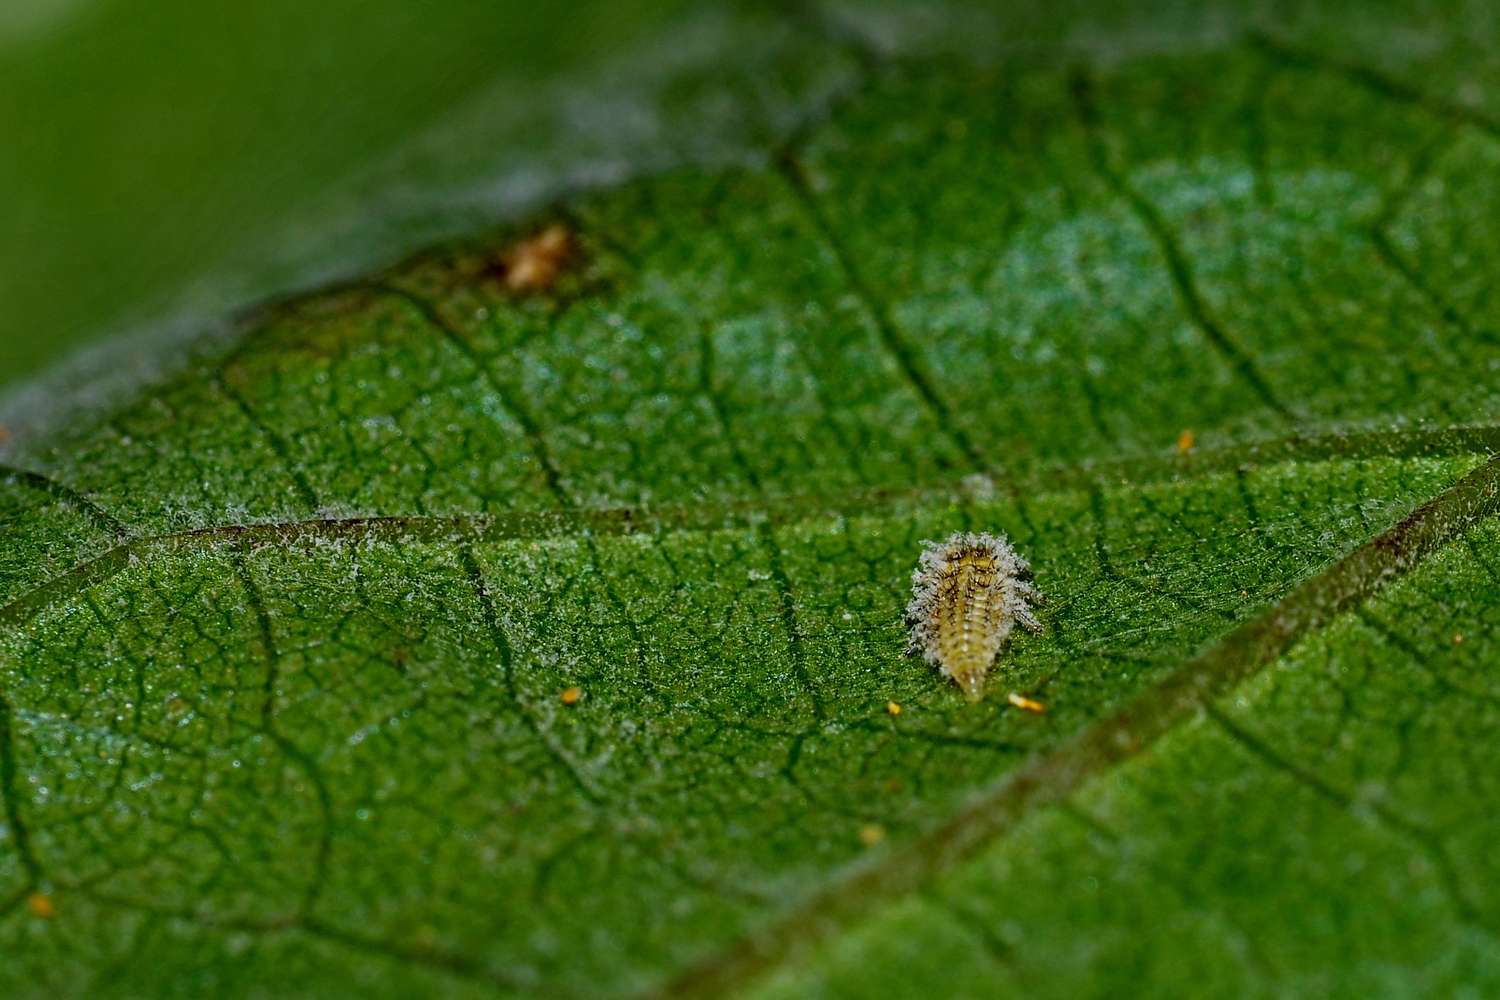 Close-up view of common garden pests like aphids, caterpillars, and slugs, and diseases like powdery mildew and blight